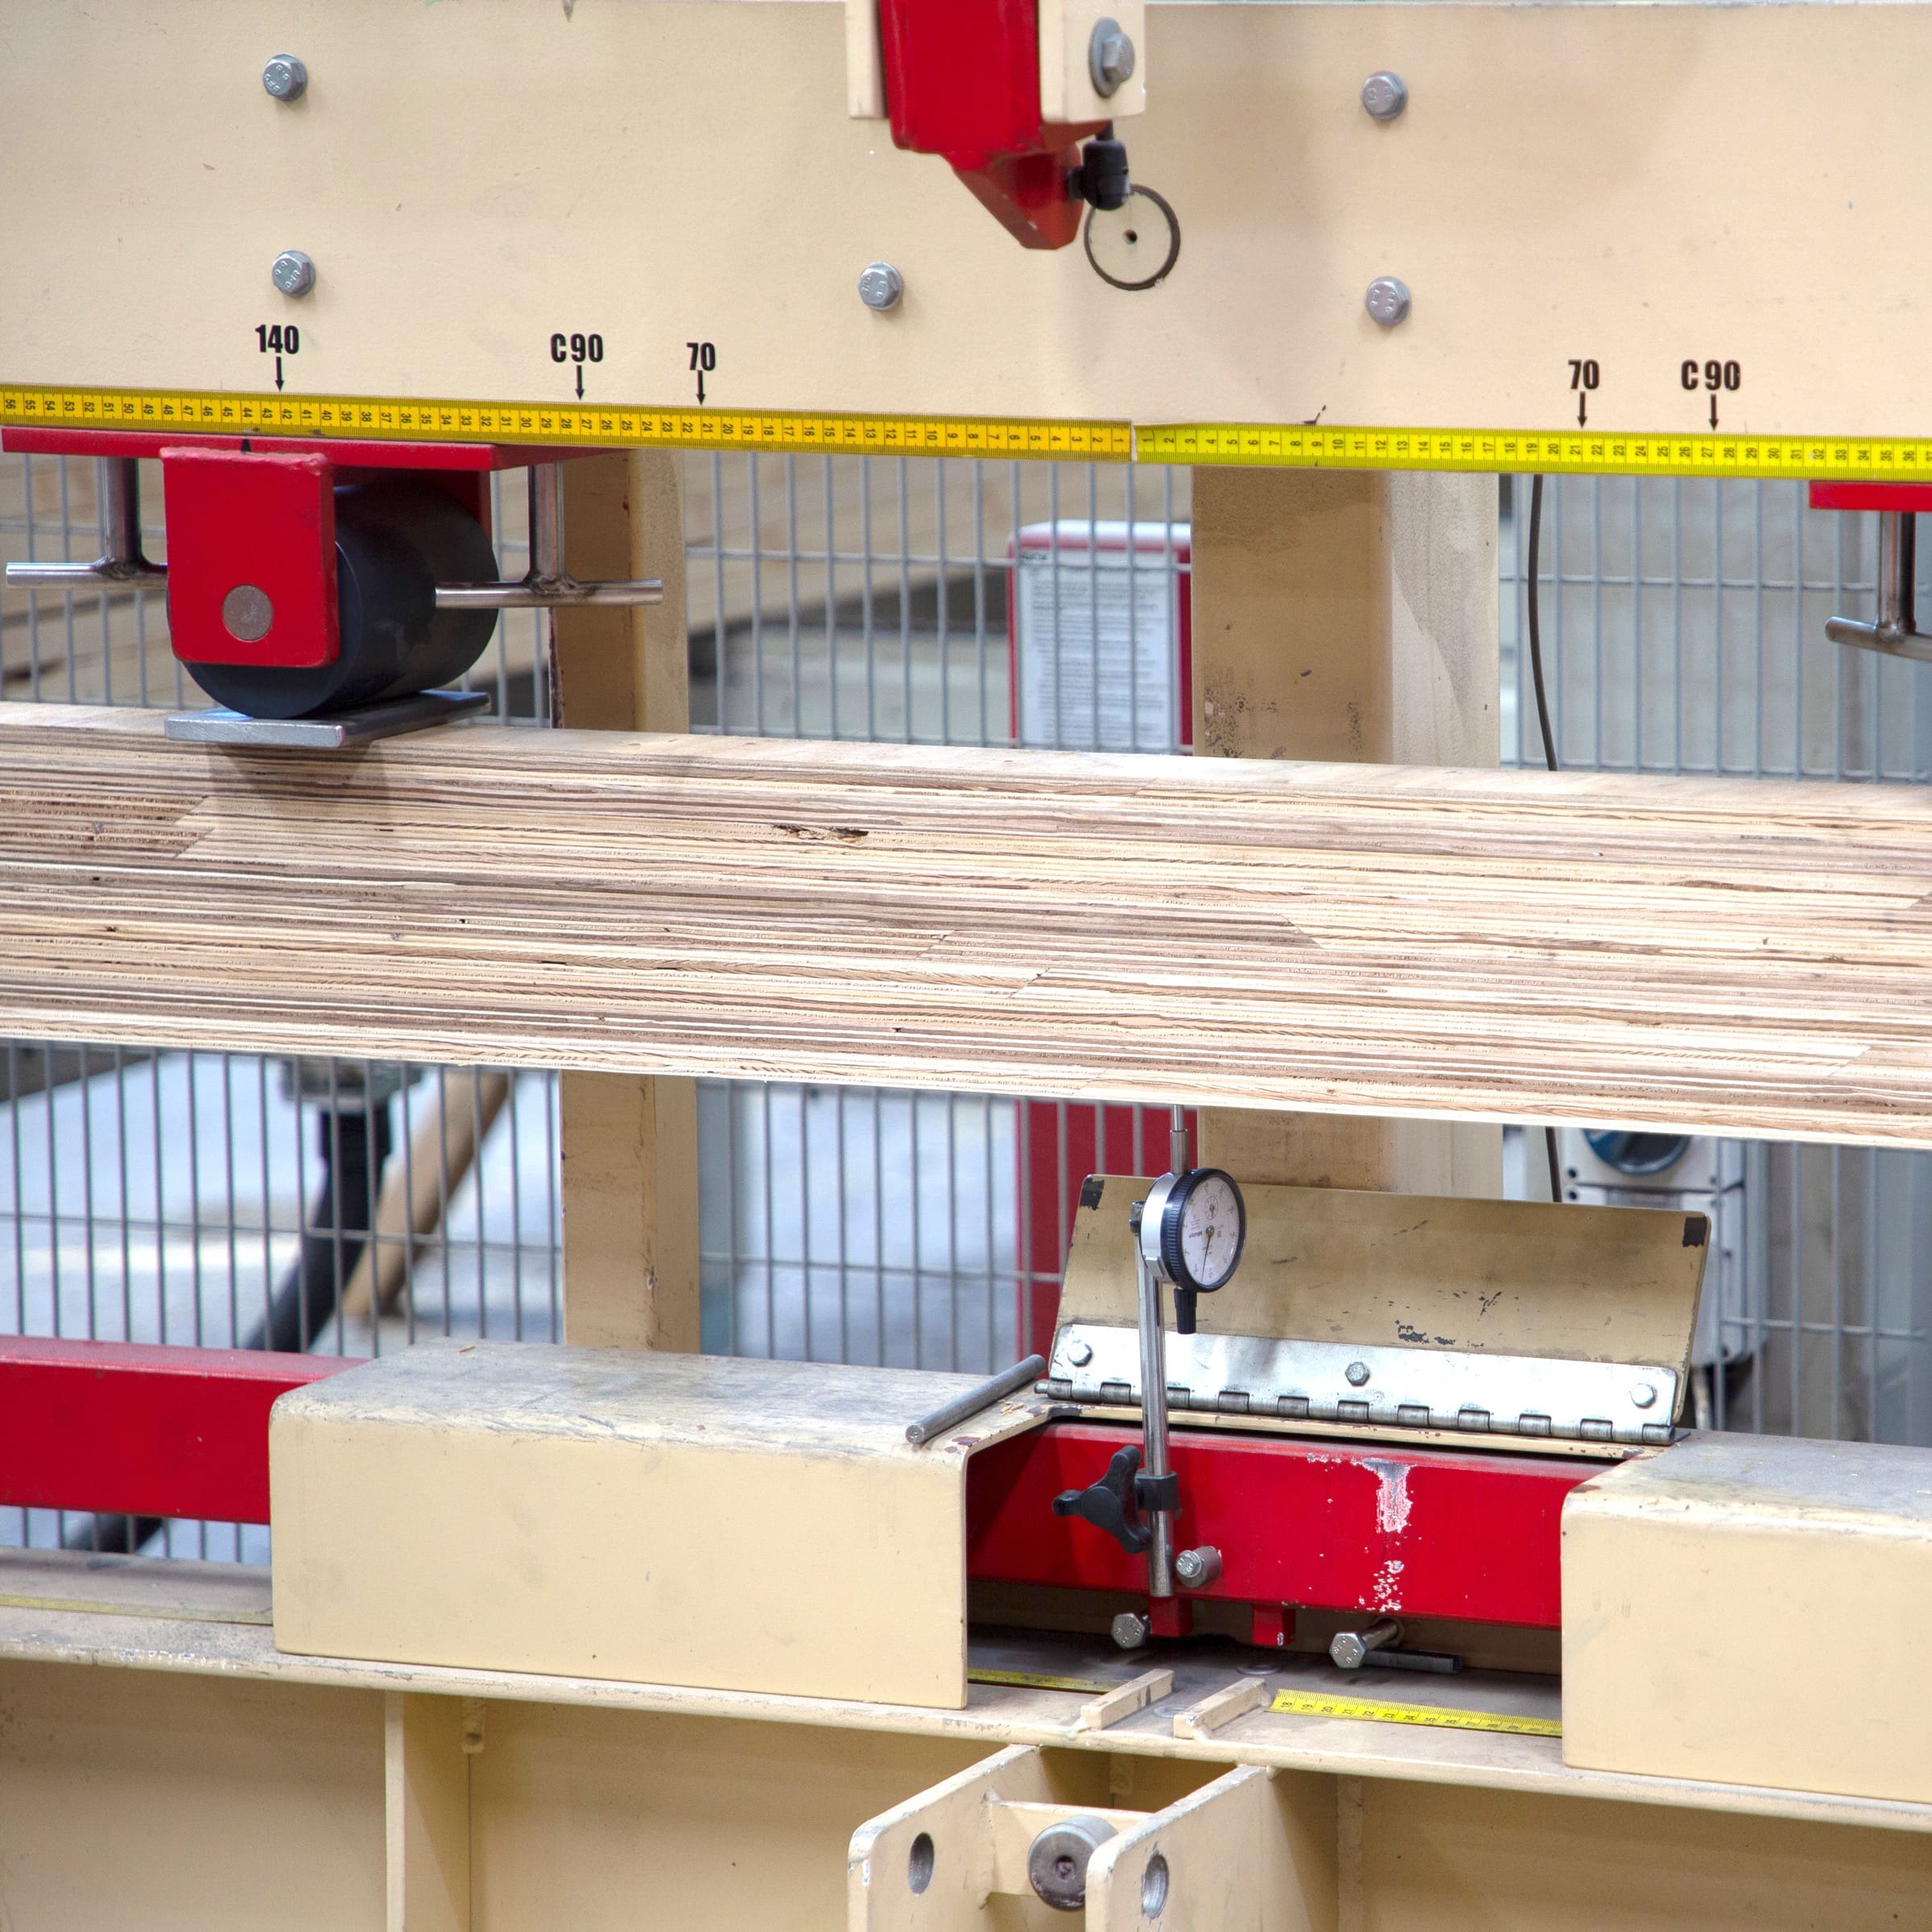 Programmed Timber Components Products and Services